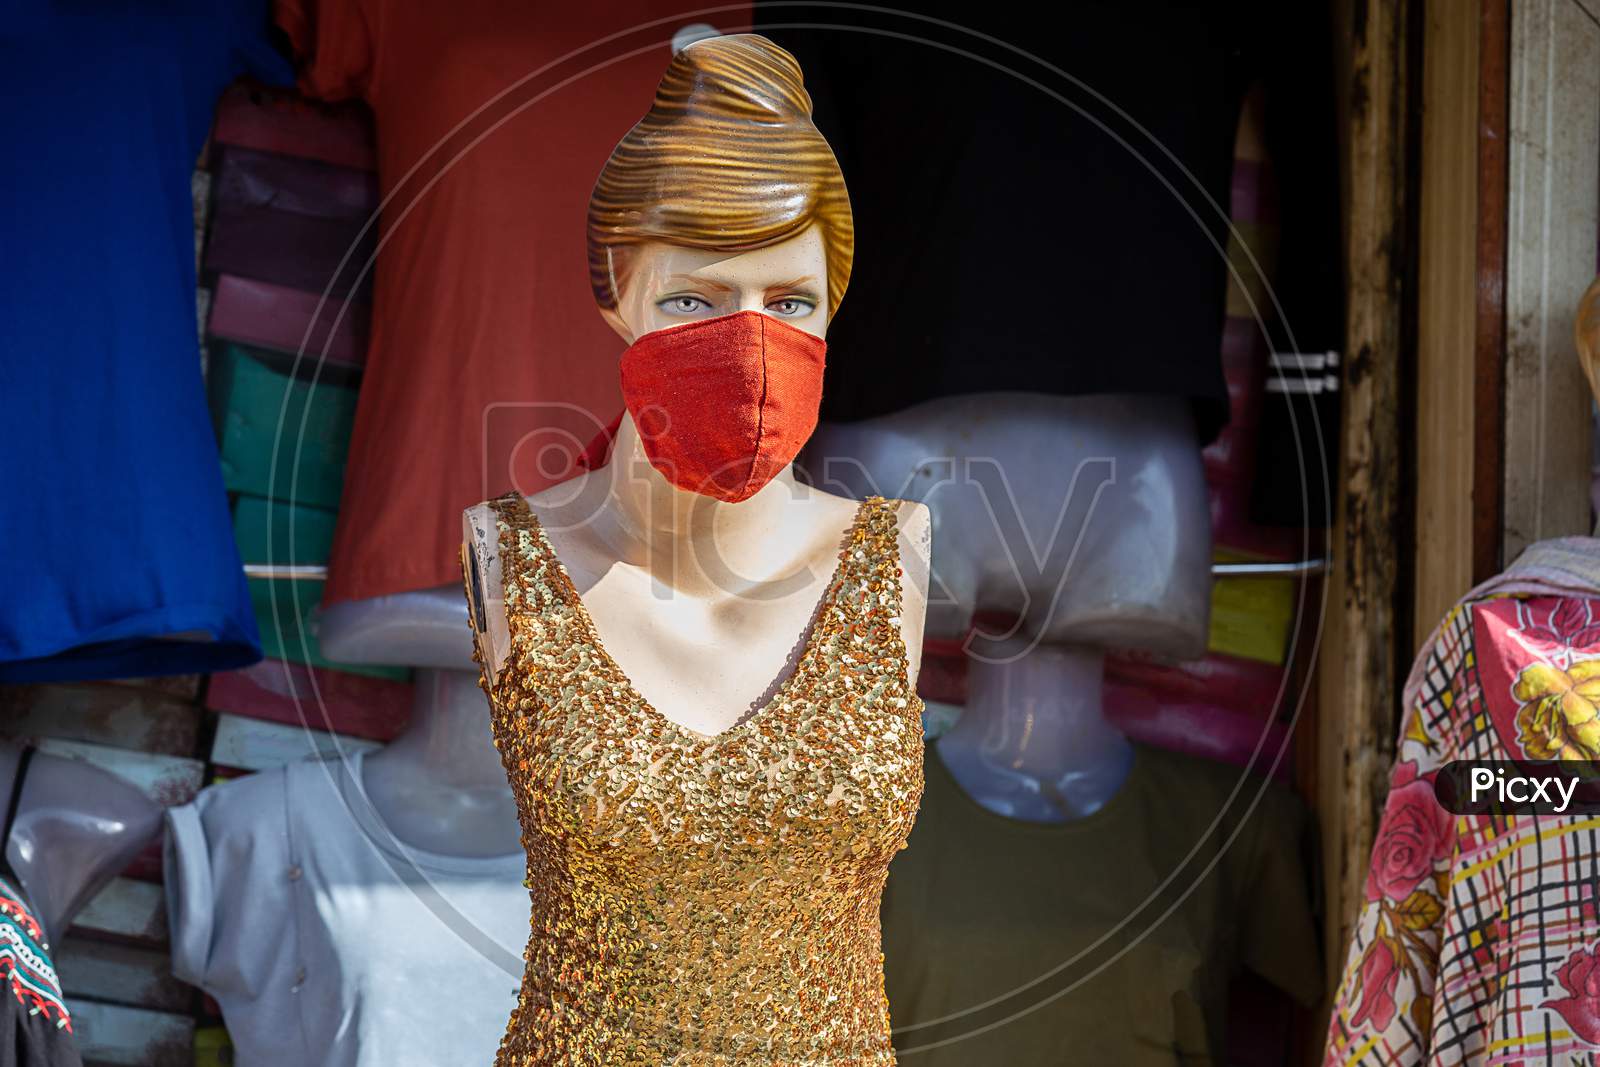 Female Mannequin With Mask On Face. Shops Are Reopening After Lock Down Restrictions Due To The Covid-19 Pandemic, Back To Normal Life With Few Safety Measure.